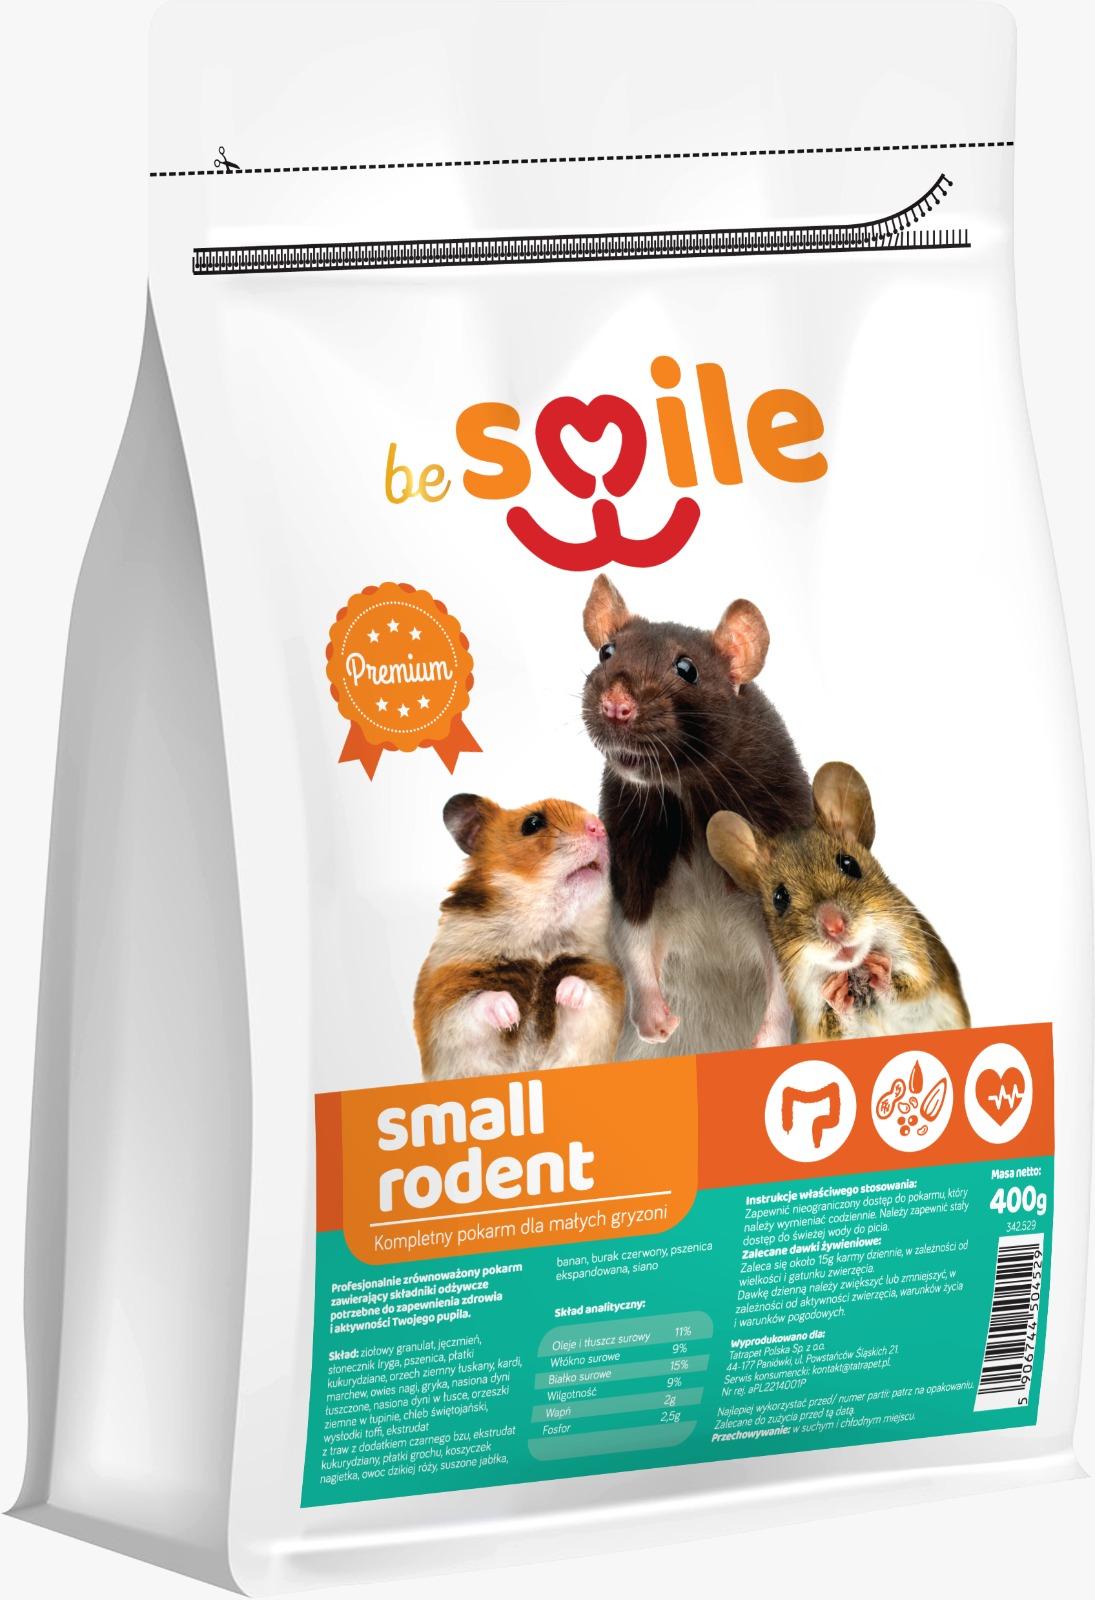 beSMILE RODENT - Small Rodent 400g food for small rodents